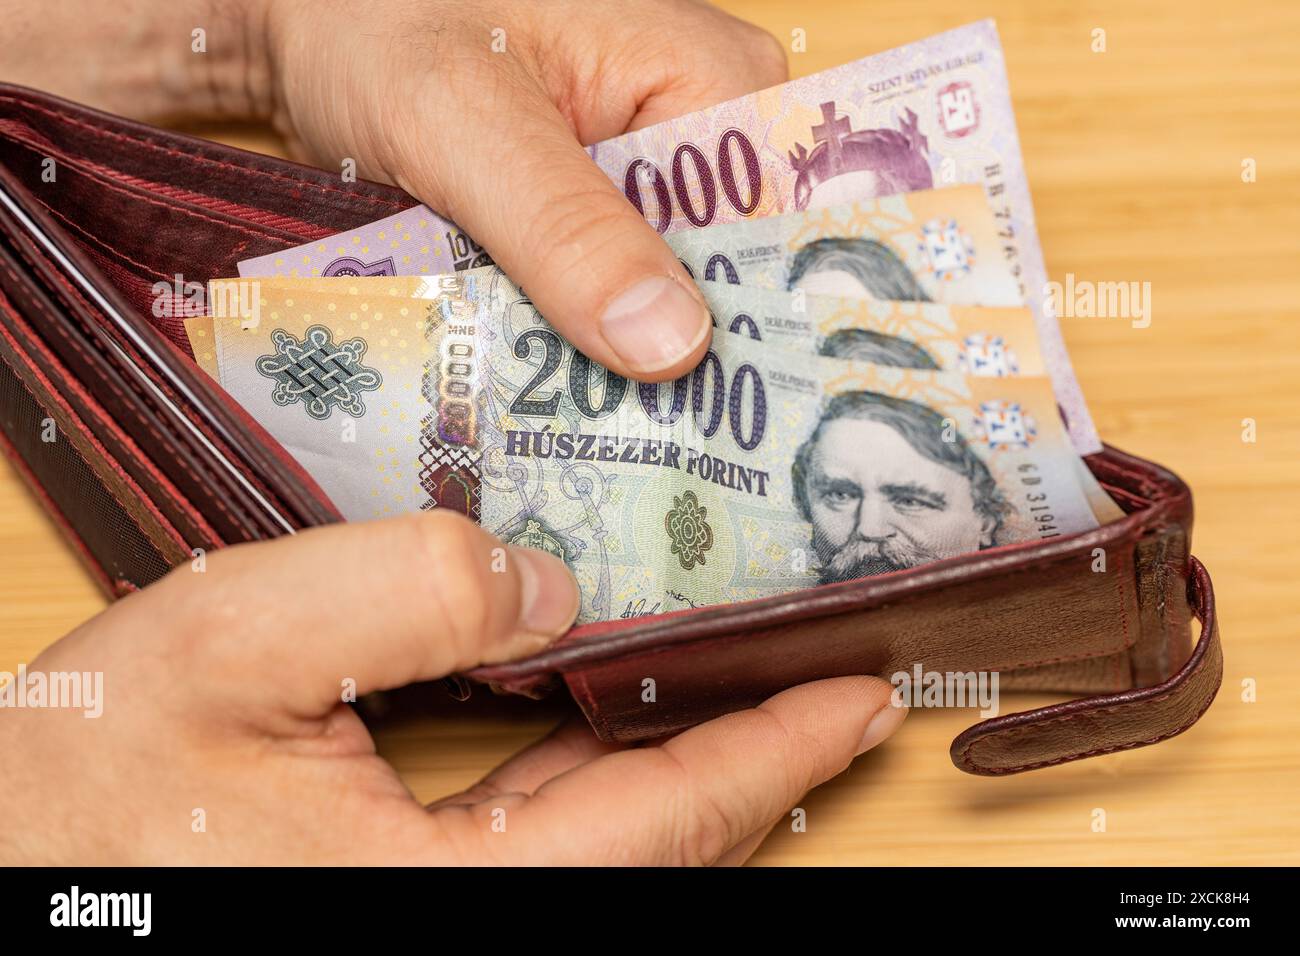 Hand takes out money from the wallet, Hungary forints, concept, rising prices, value of Hungarian currency Stock Photo